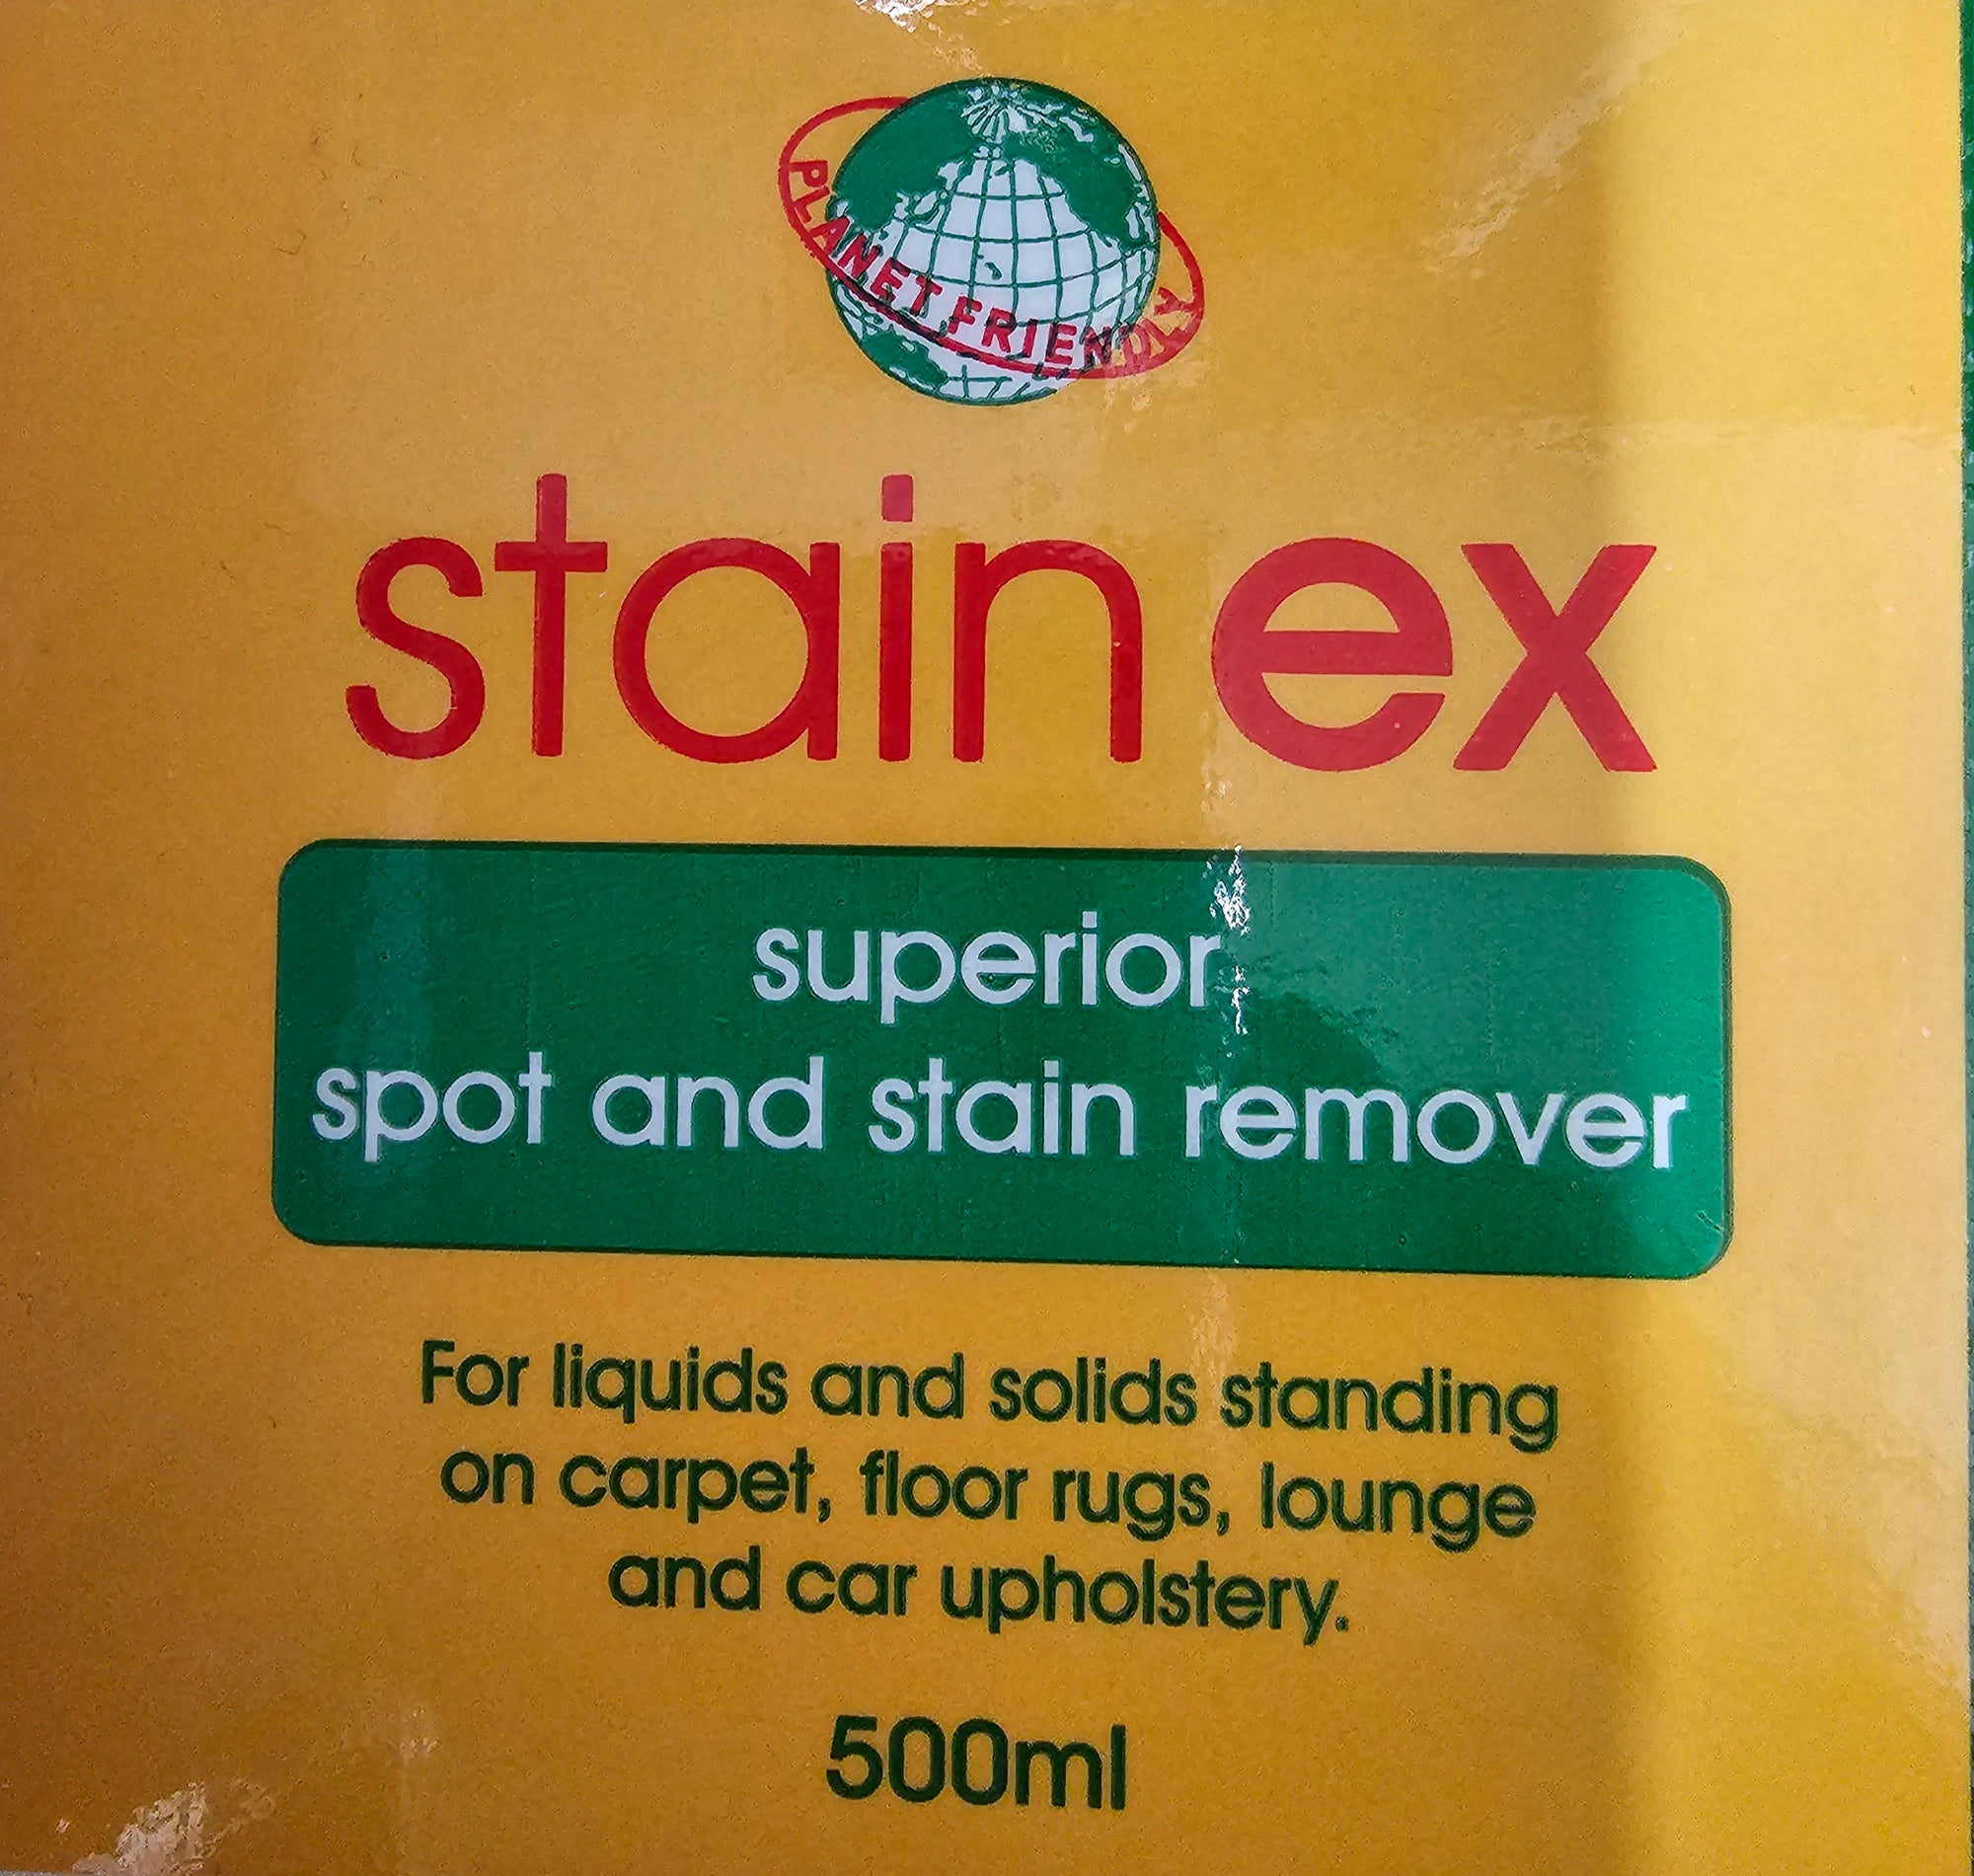 Stainex-Spot and Stain remover